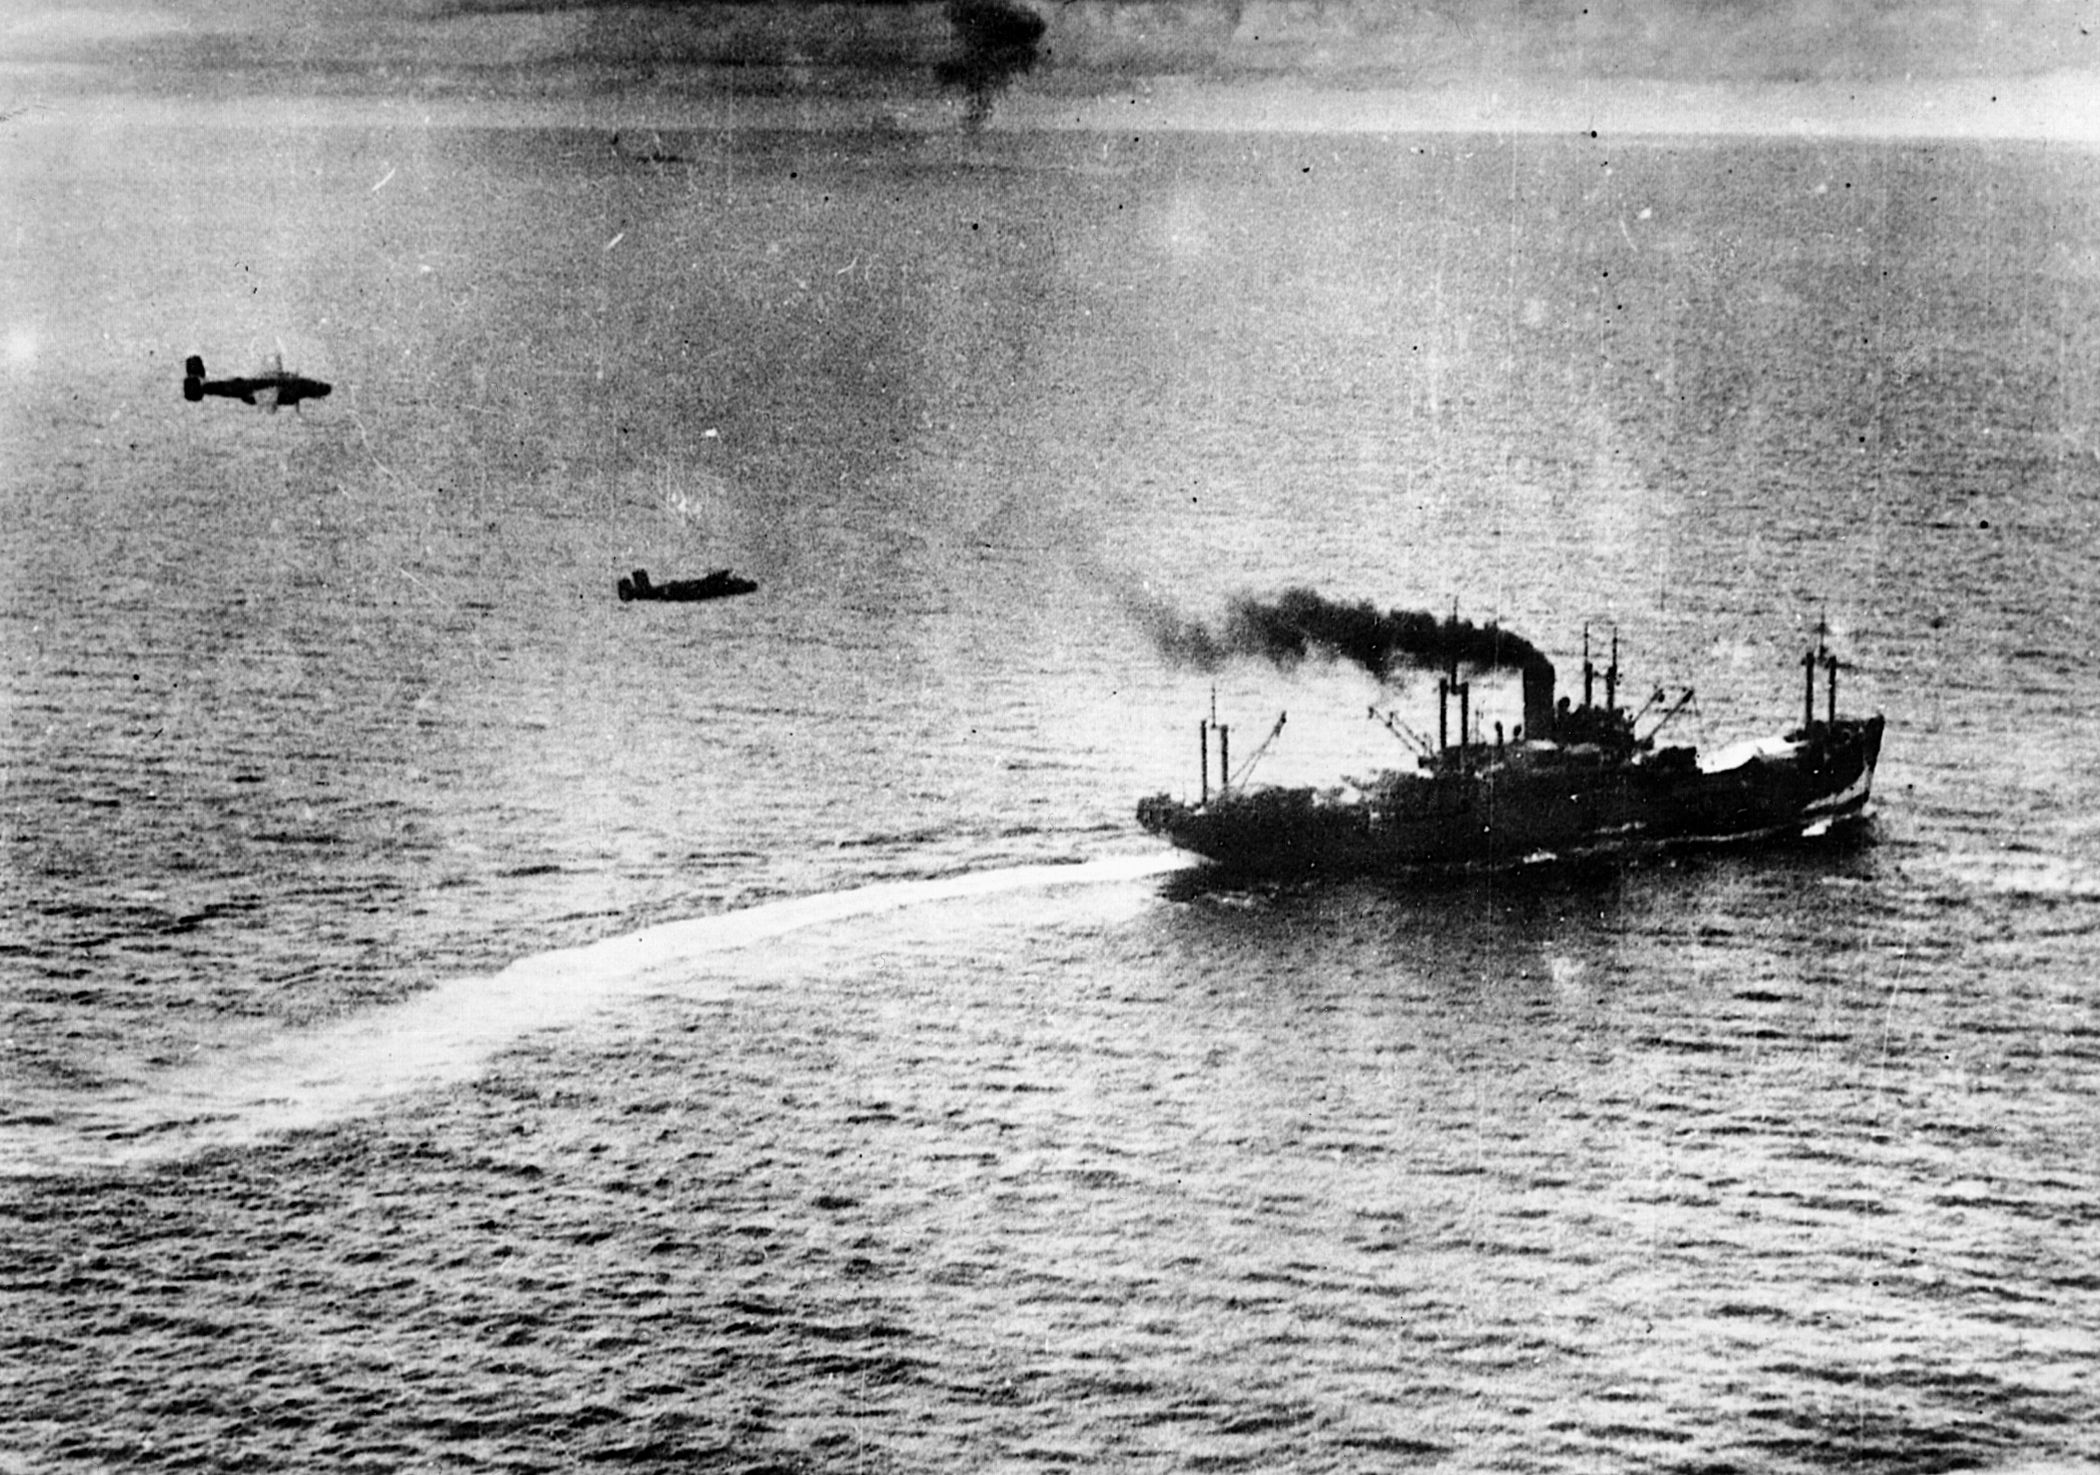 A pair of U.S. medium-range bombers prepares to drop its payload on a Japanese merchant ship during the Battle of the Bismarck Sea.